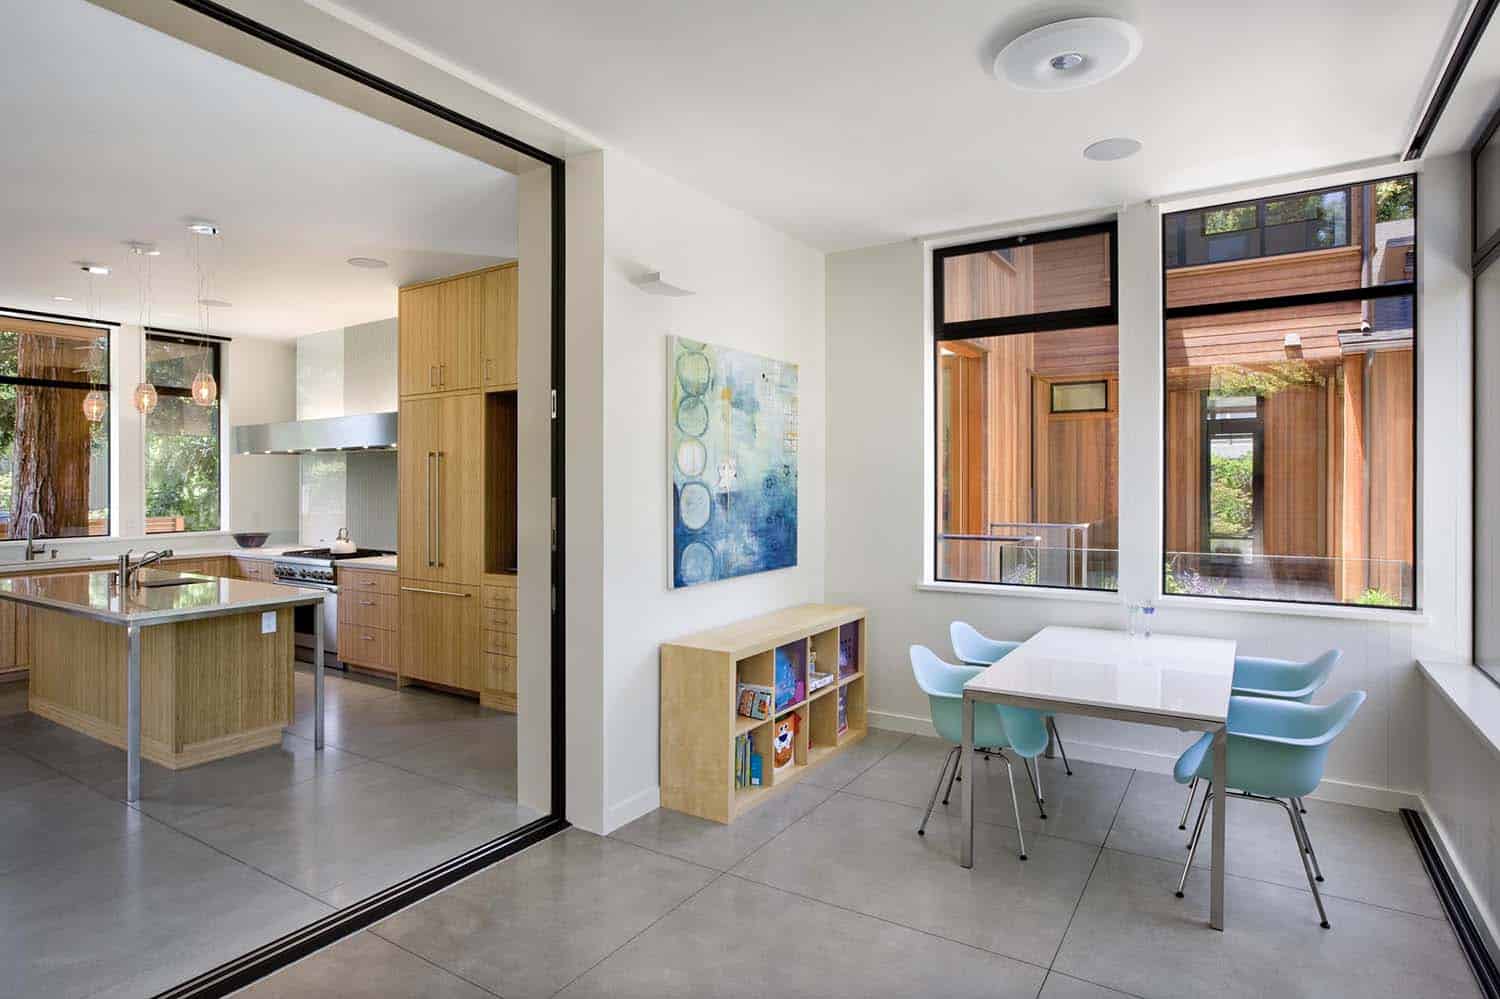 view of the indoor-outdoor porch opens to the kitchen with sliding glass doors that pocket into the wall